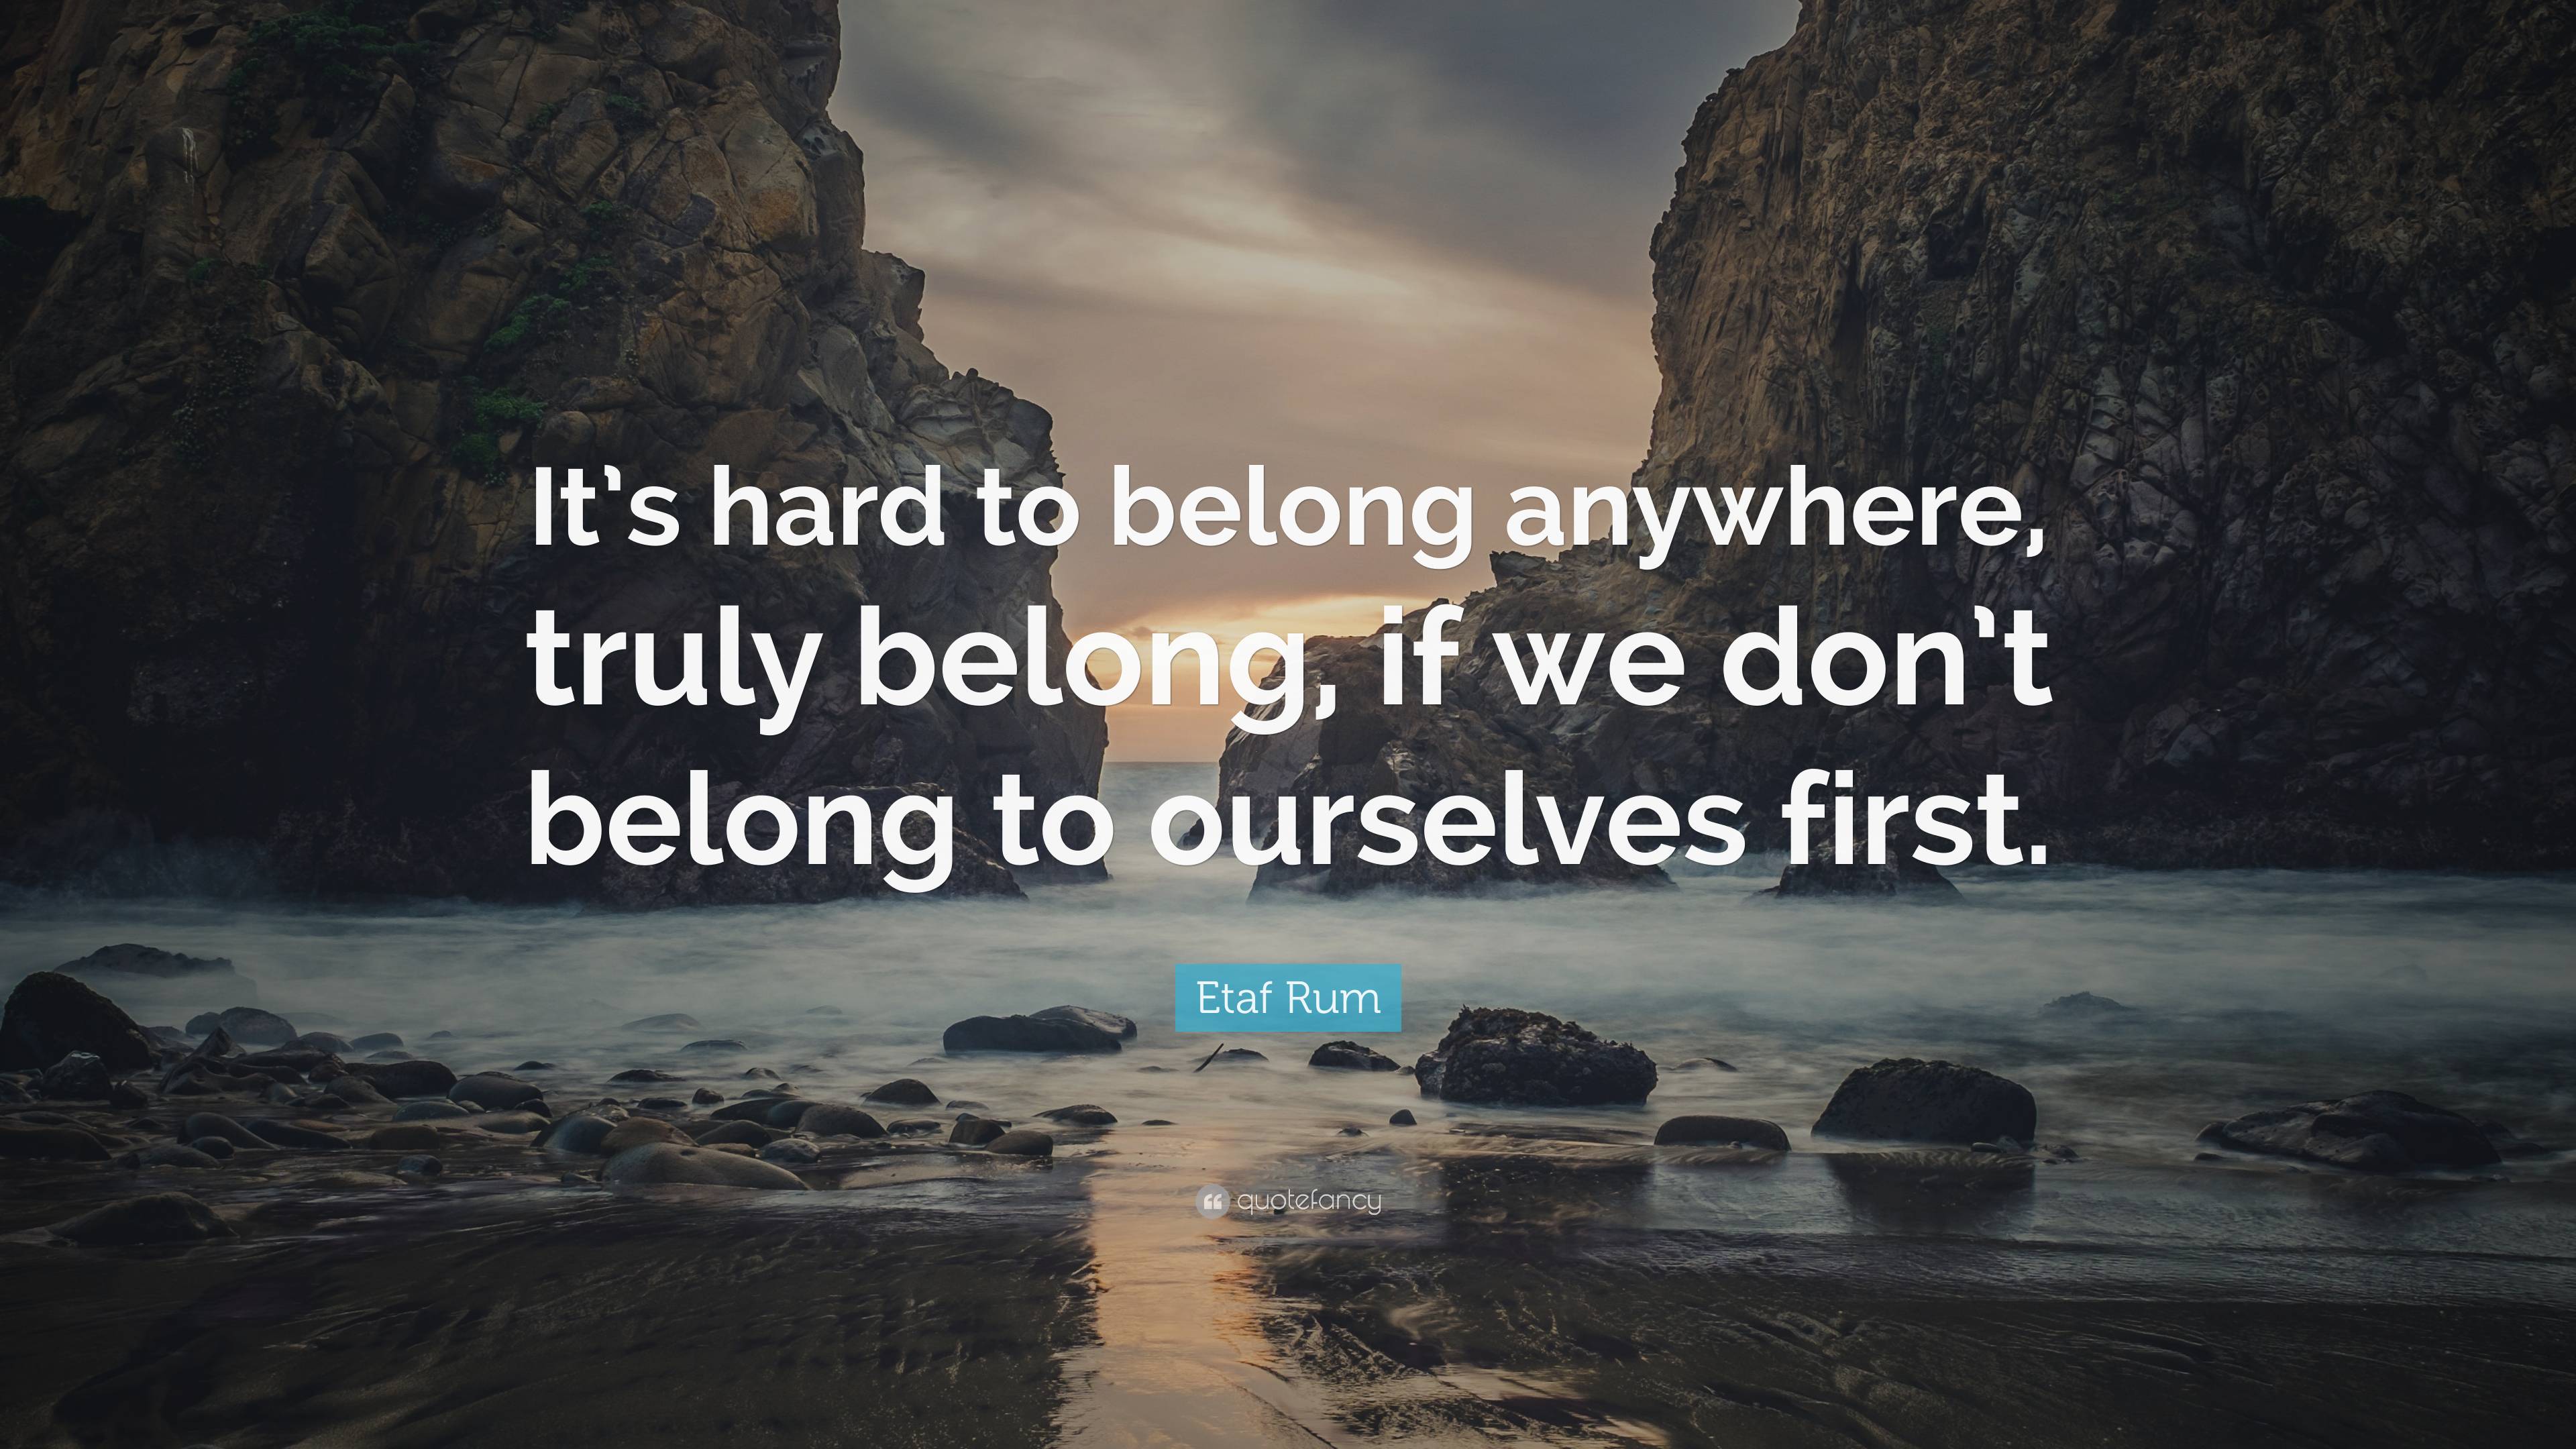 Etaf Rum Quote: “It’s hard to belong anywhere, truly belong, if we don ...